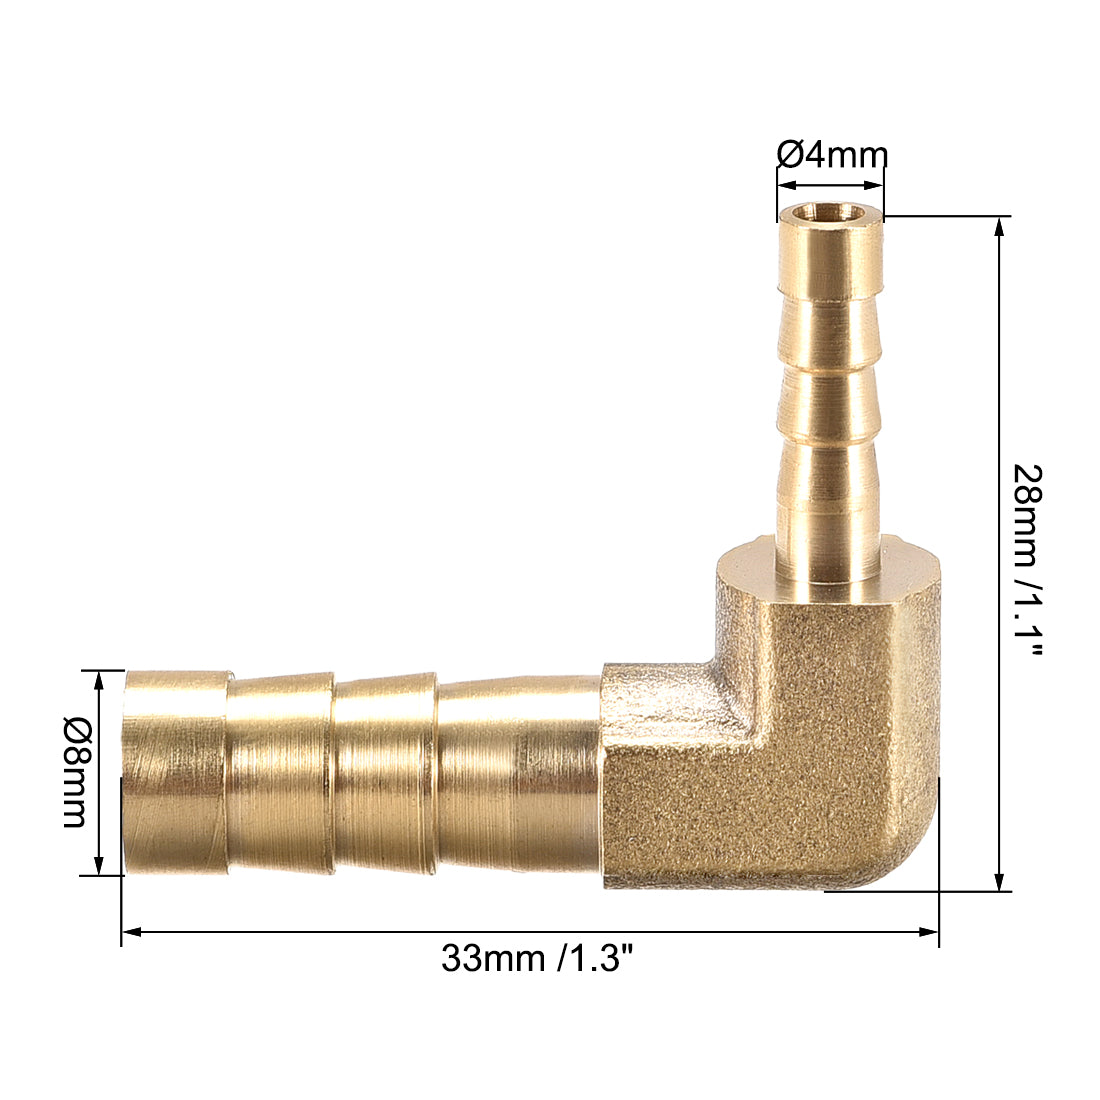 Uxcell Uxcell 8mm to 4mm Barb Brass Hose Fitting 90 Degree Elbow Pipe Connector Coupler